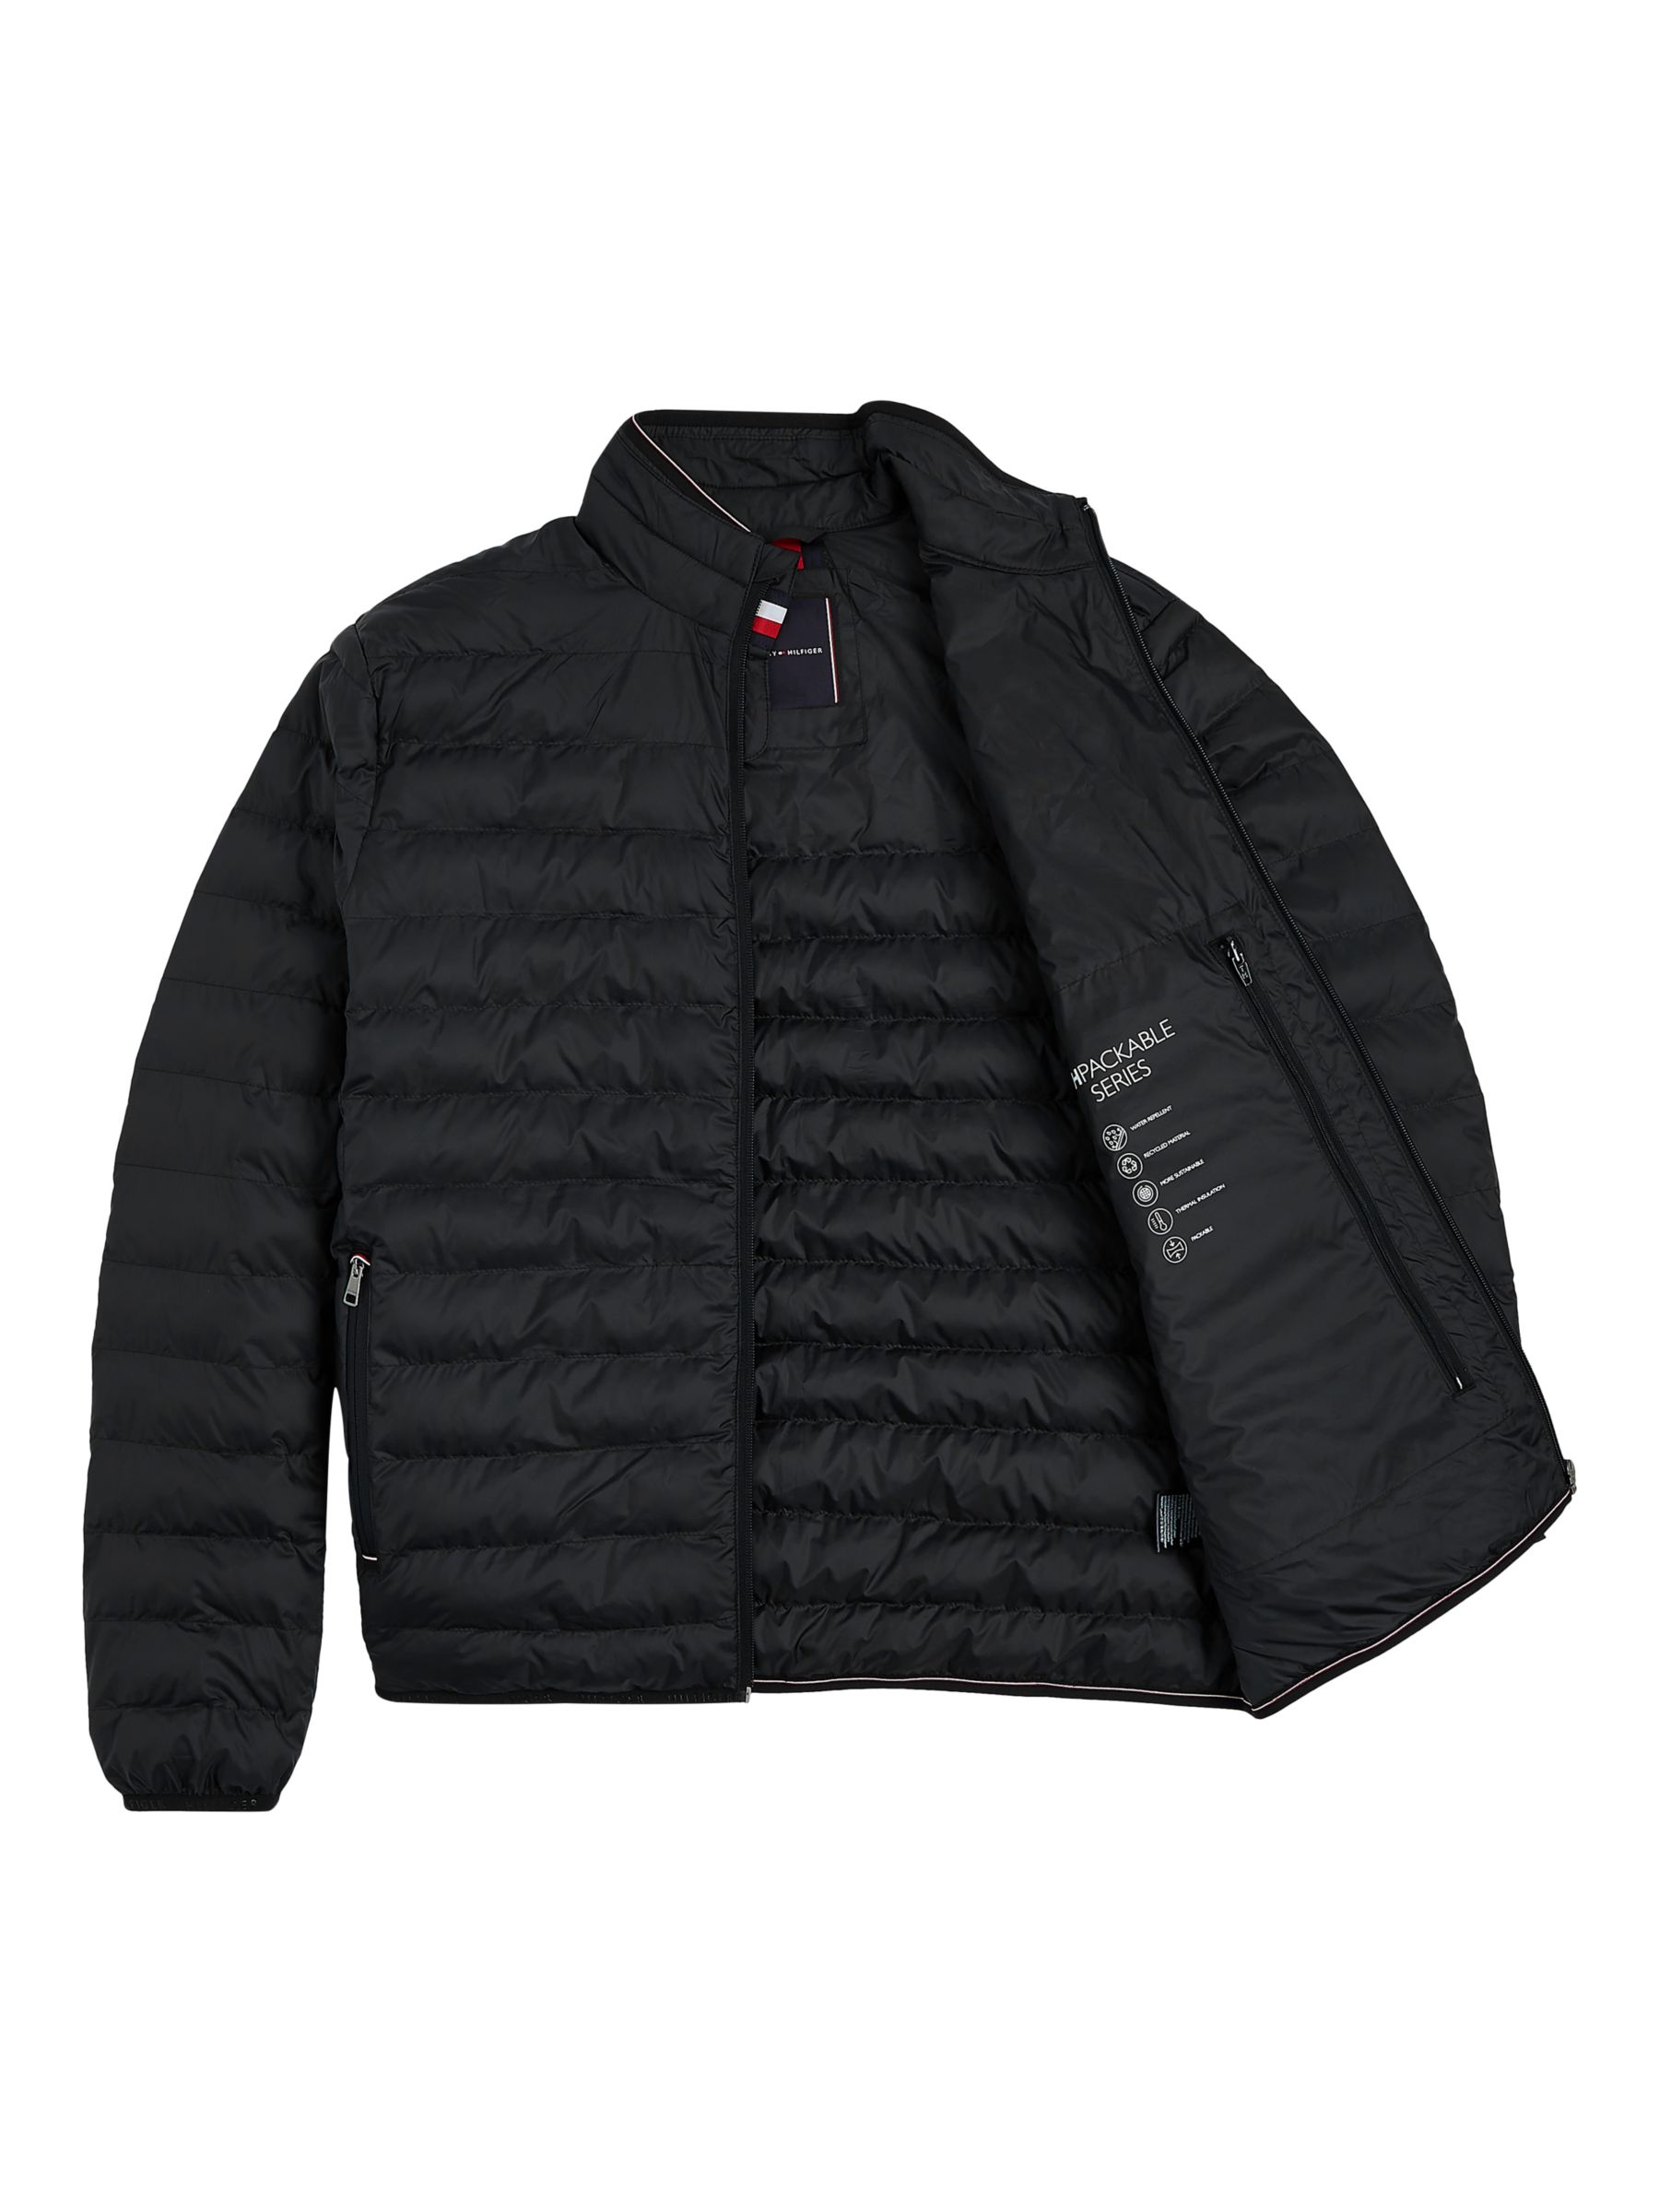 Tommy Hilfiger Packable Down Quilted Jacket, Black at John Lewis